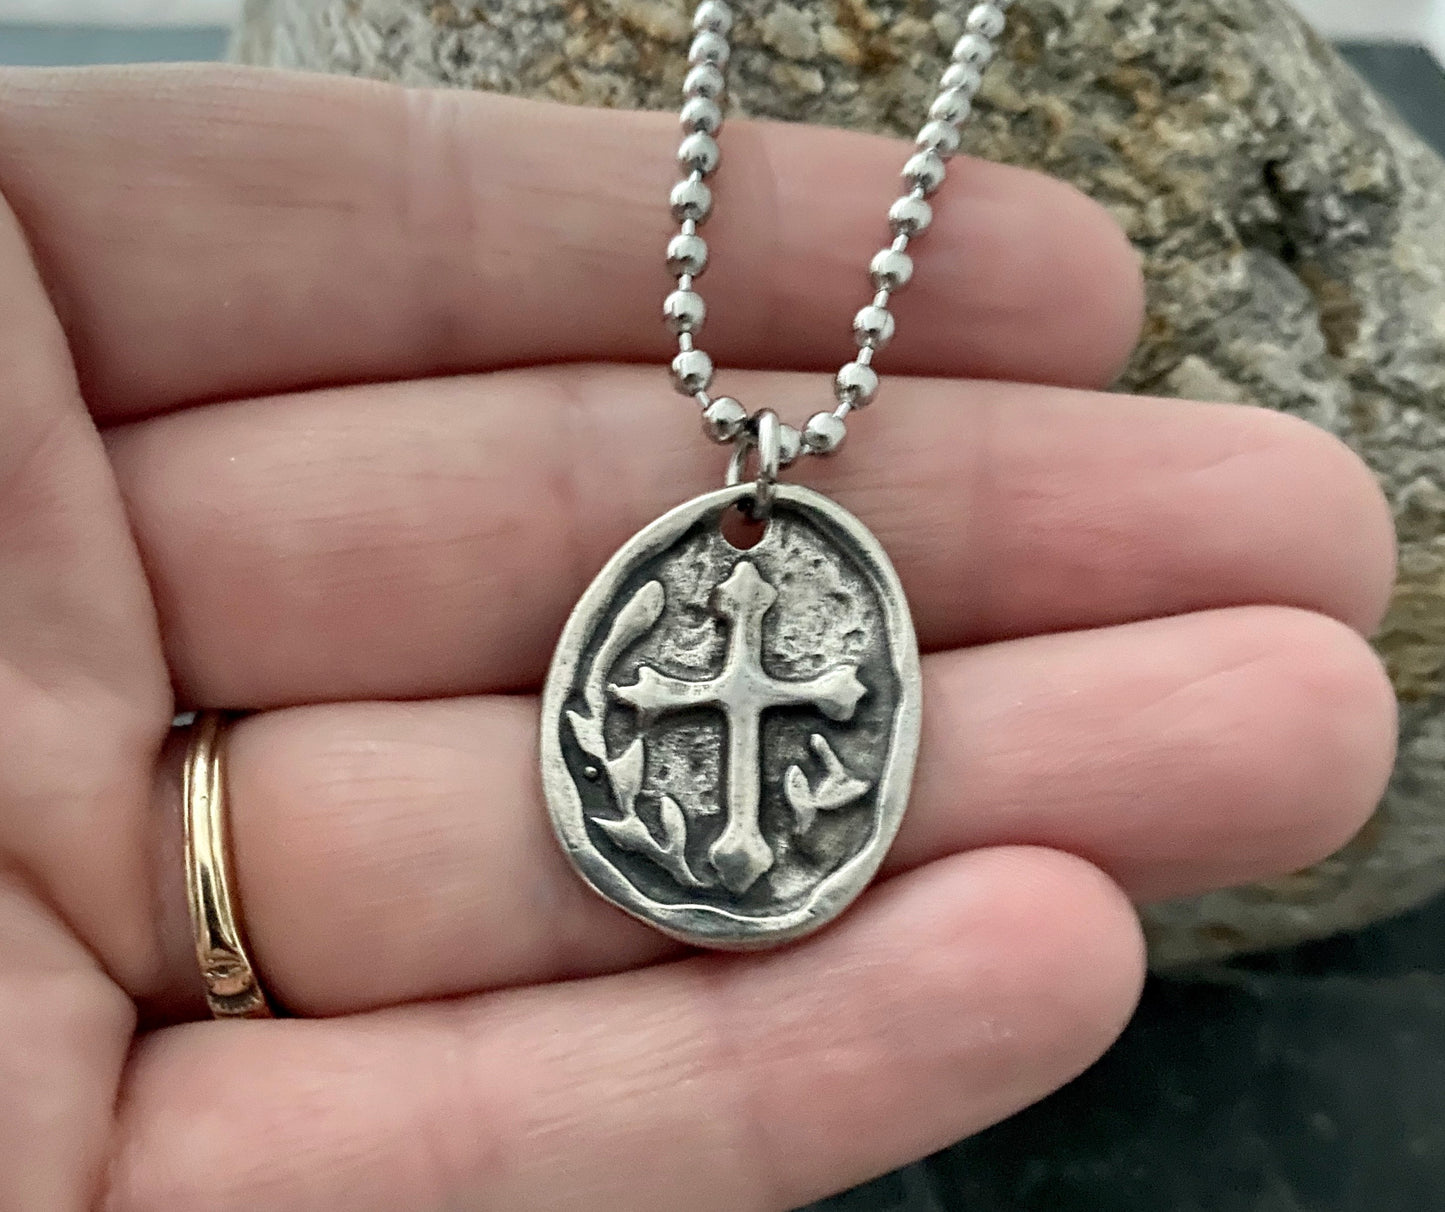 Men's necklace with a vintage feel cross on oval pendant, unisex jewelry, cross, mens fashion, 20 and 24 inch length ST-007